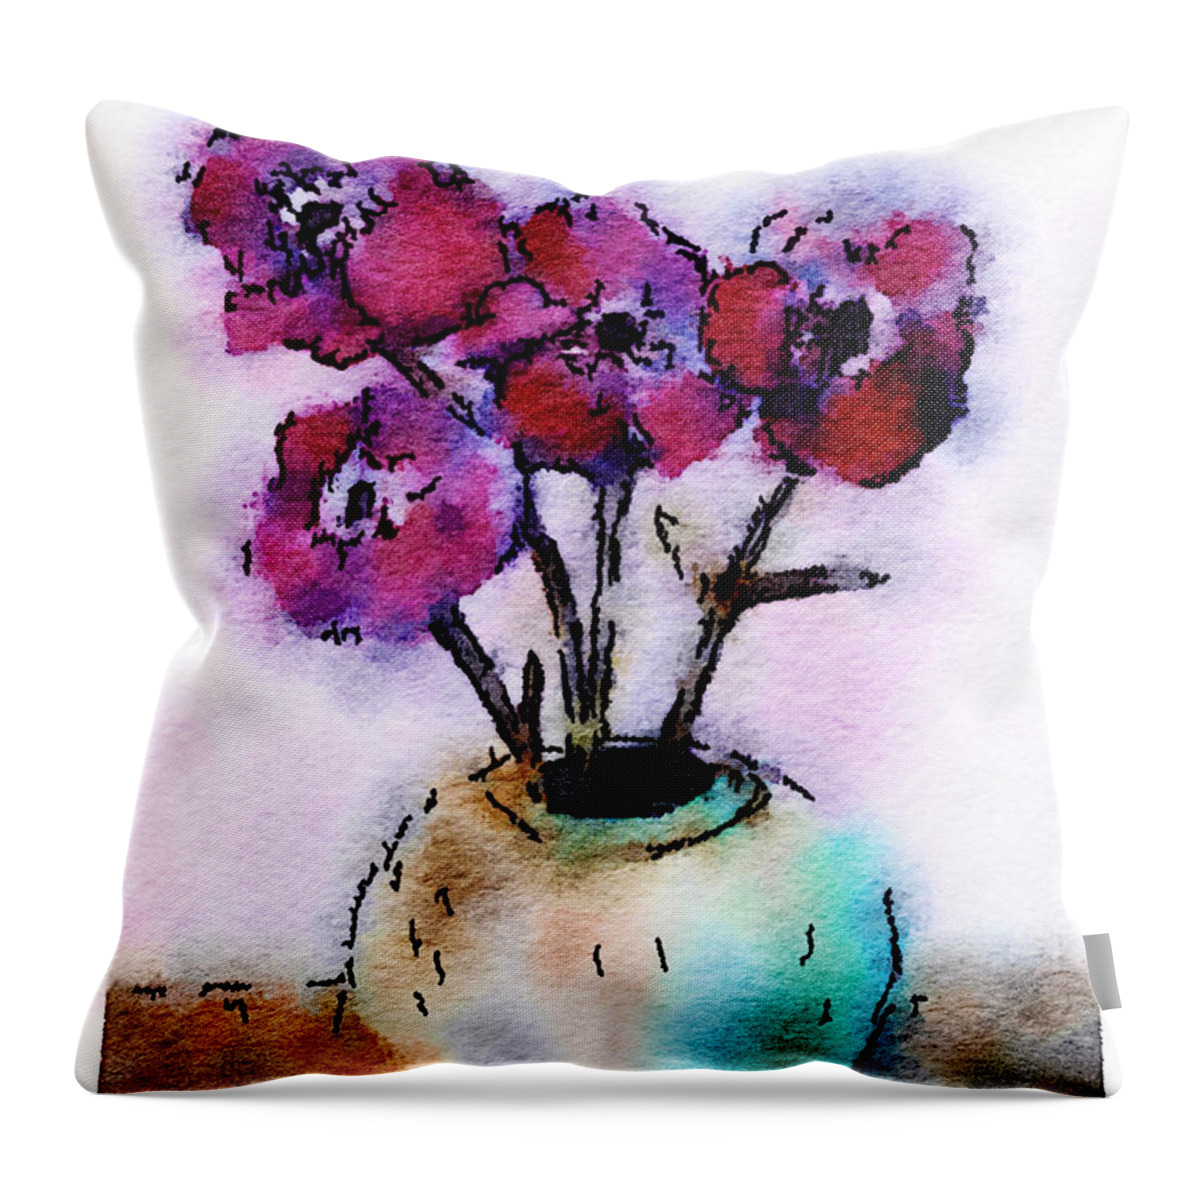 Flowers Throw Pillow featuring the painting Flowers 7 by Vanessa Katz